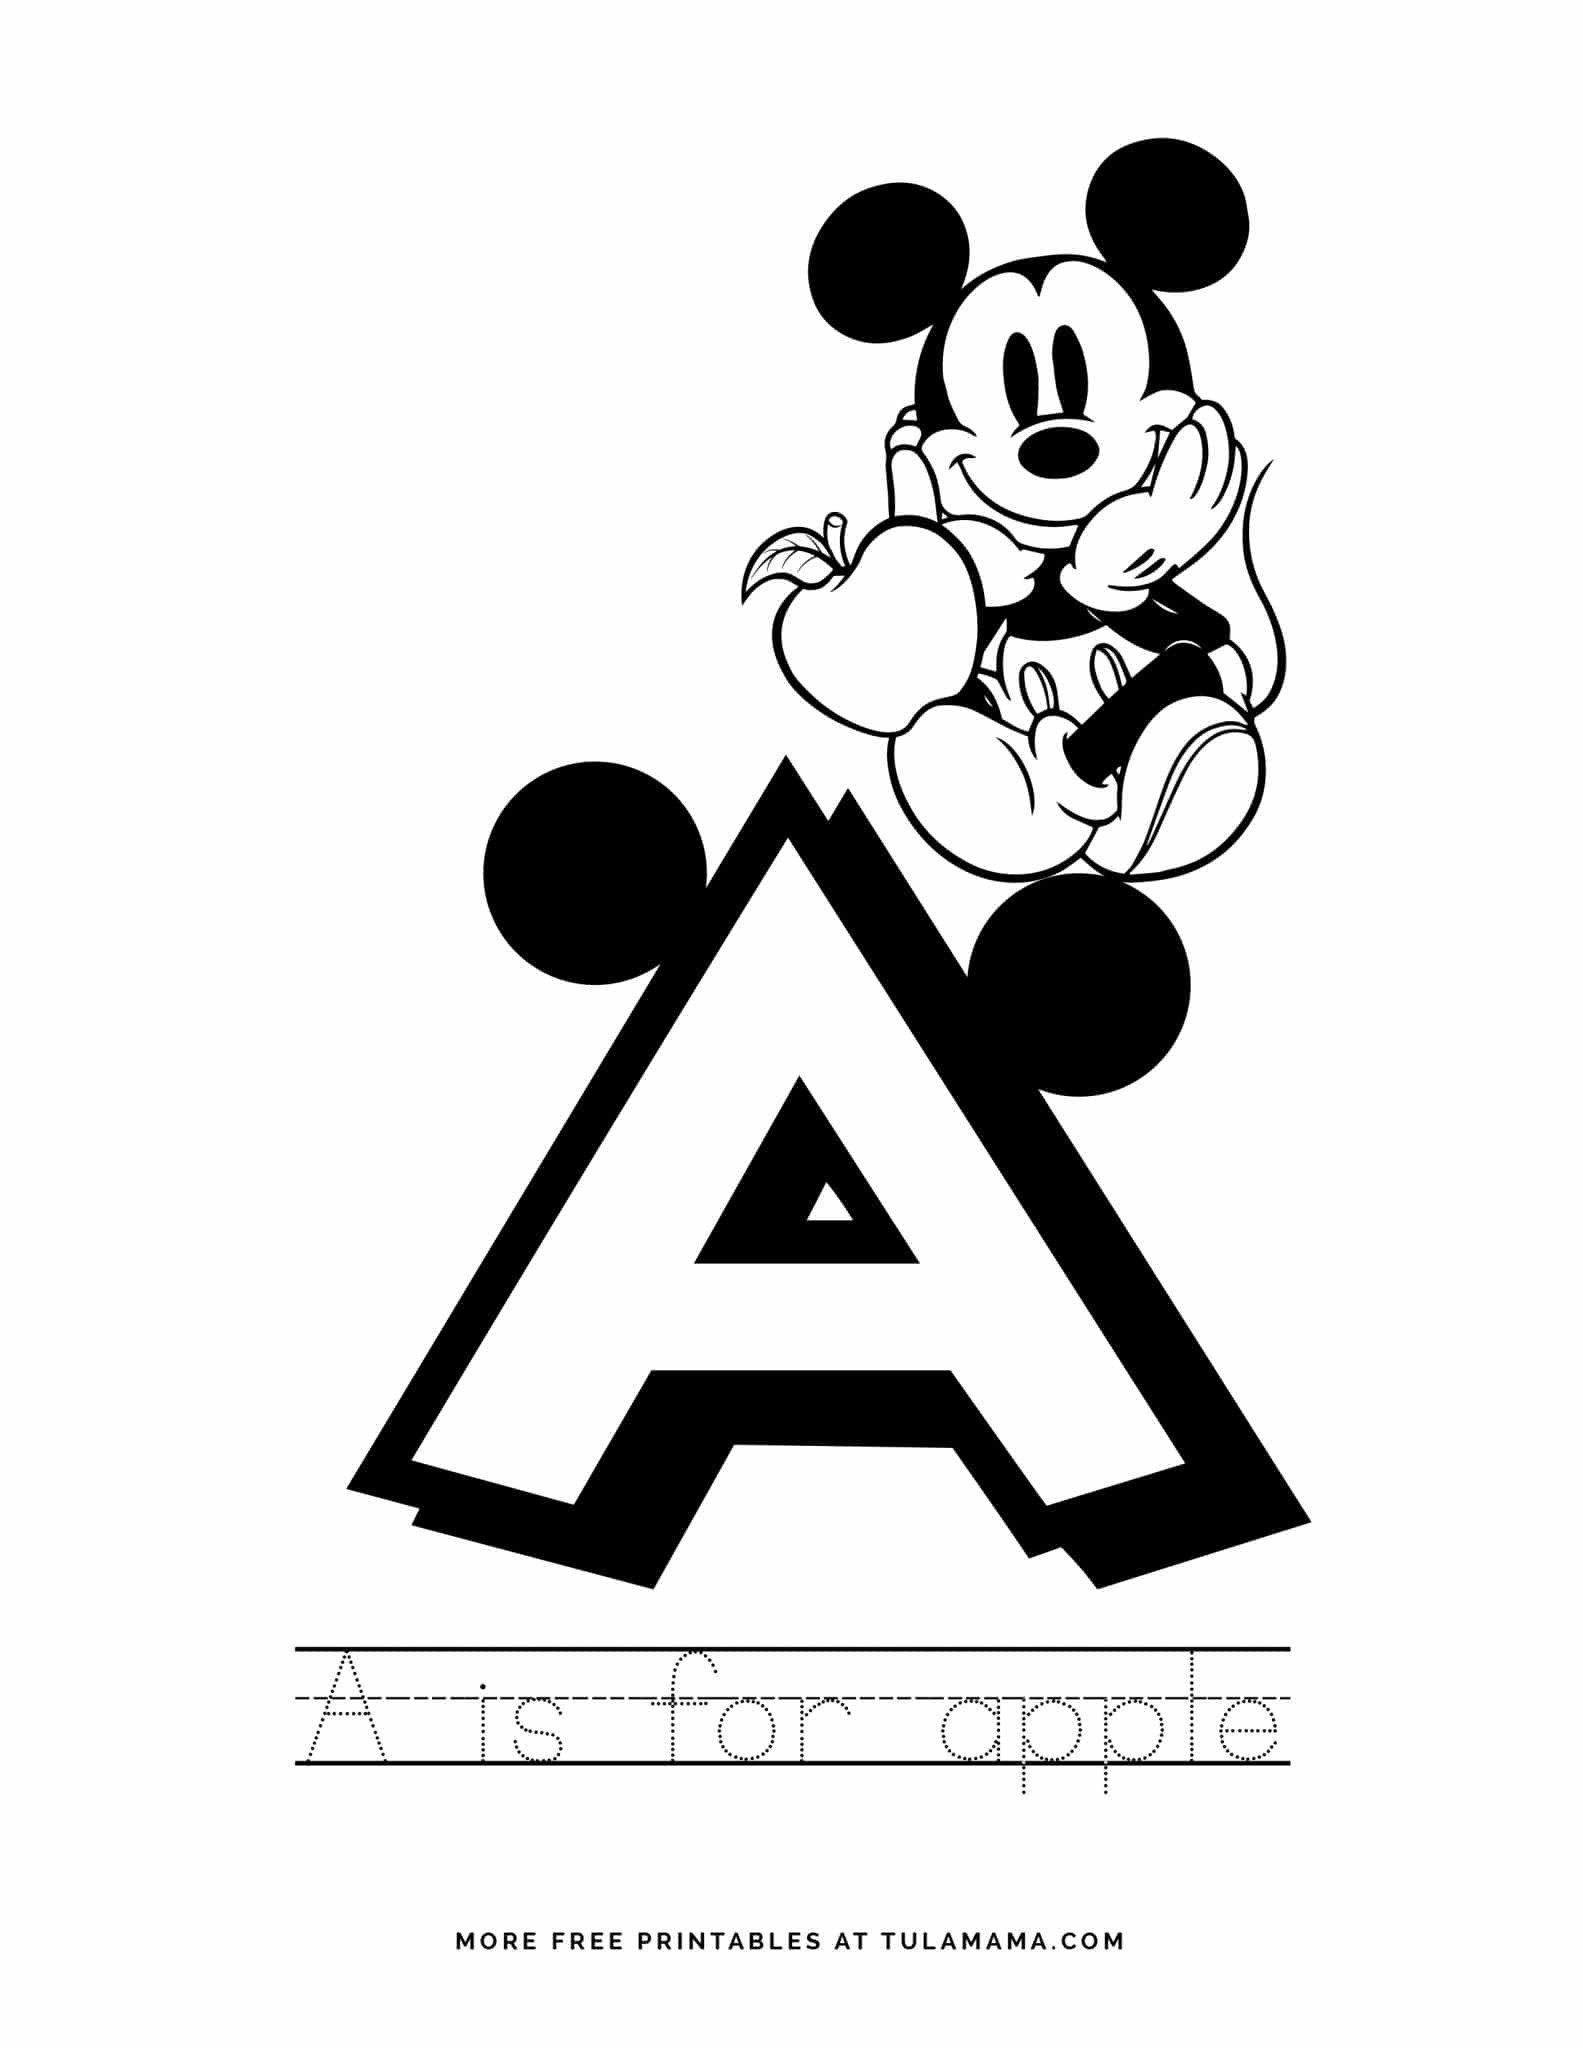 free-printable-mickey-mouse-abc-coloring-pages-tulamama